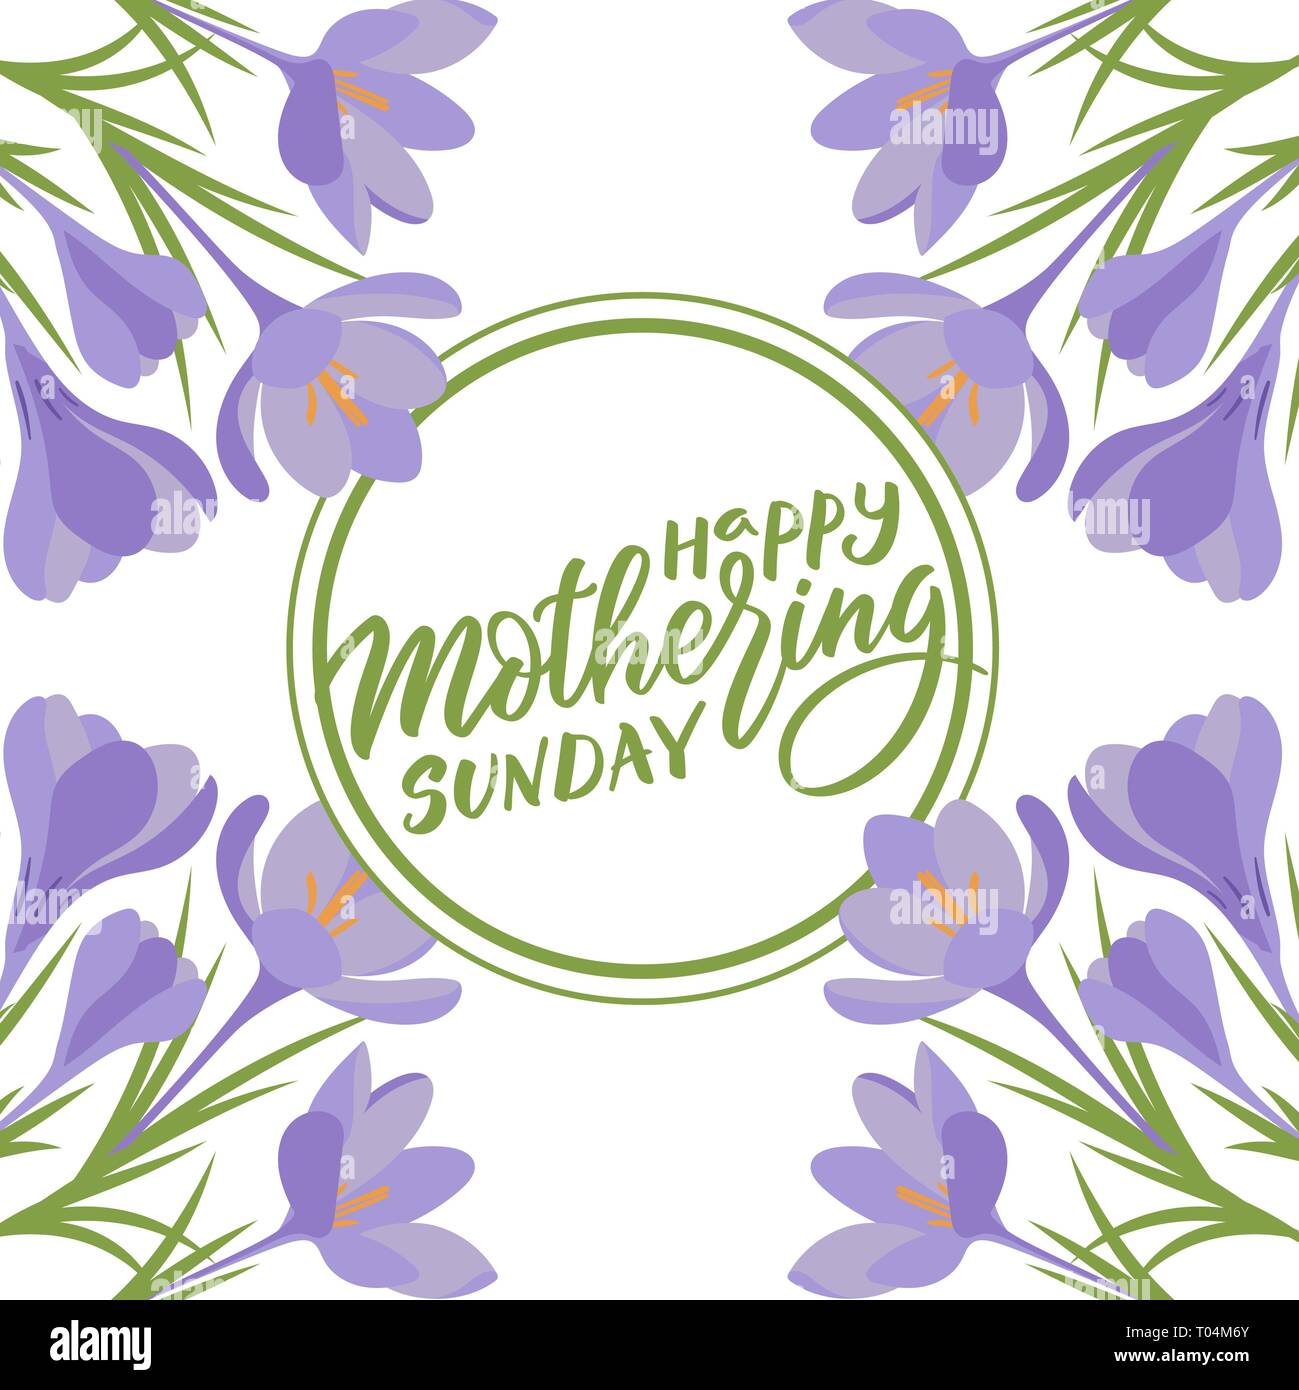 Happy mother's day text typography, lettering in circle framed with crocus flowers. for greeting cards, printed items. Round shape frame, green color  Stock Vector